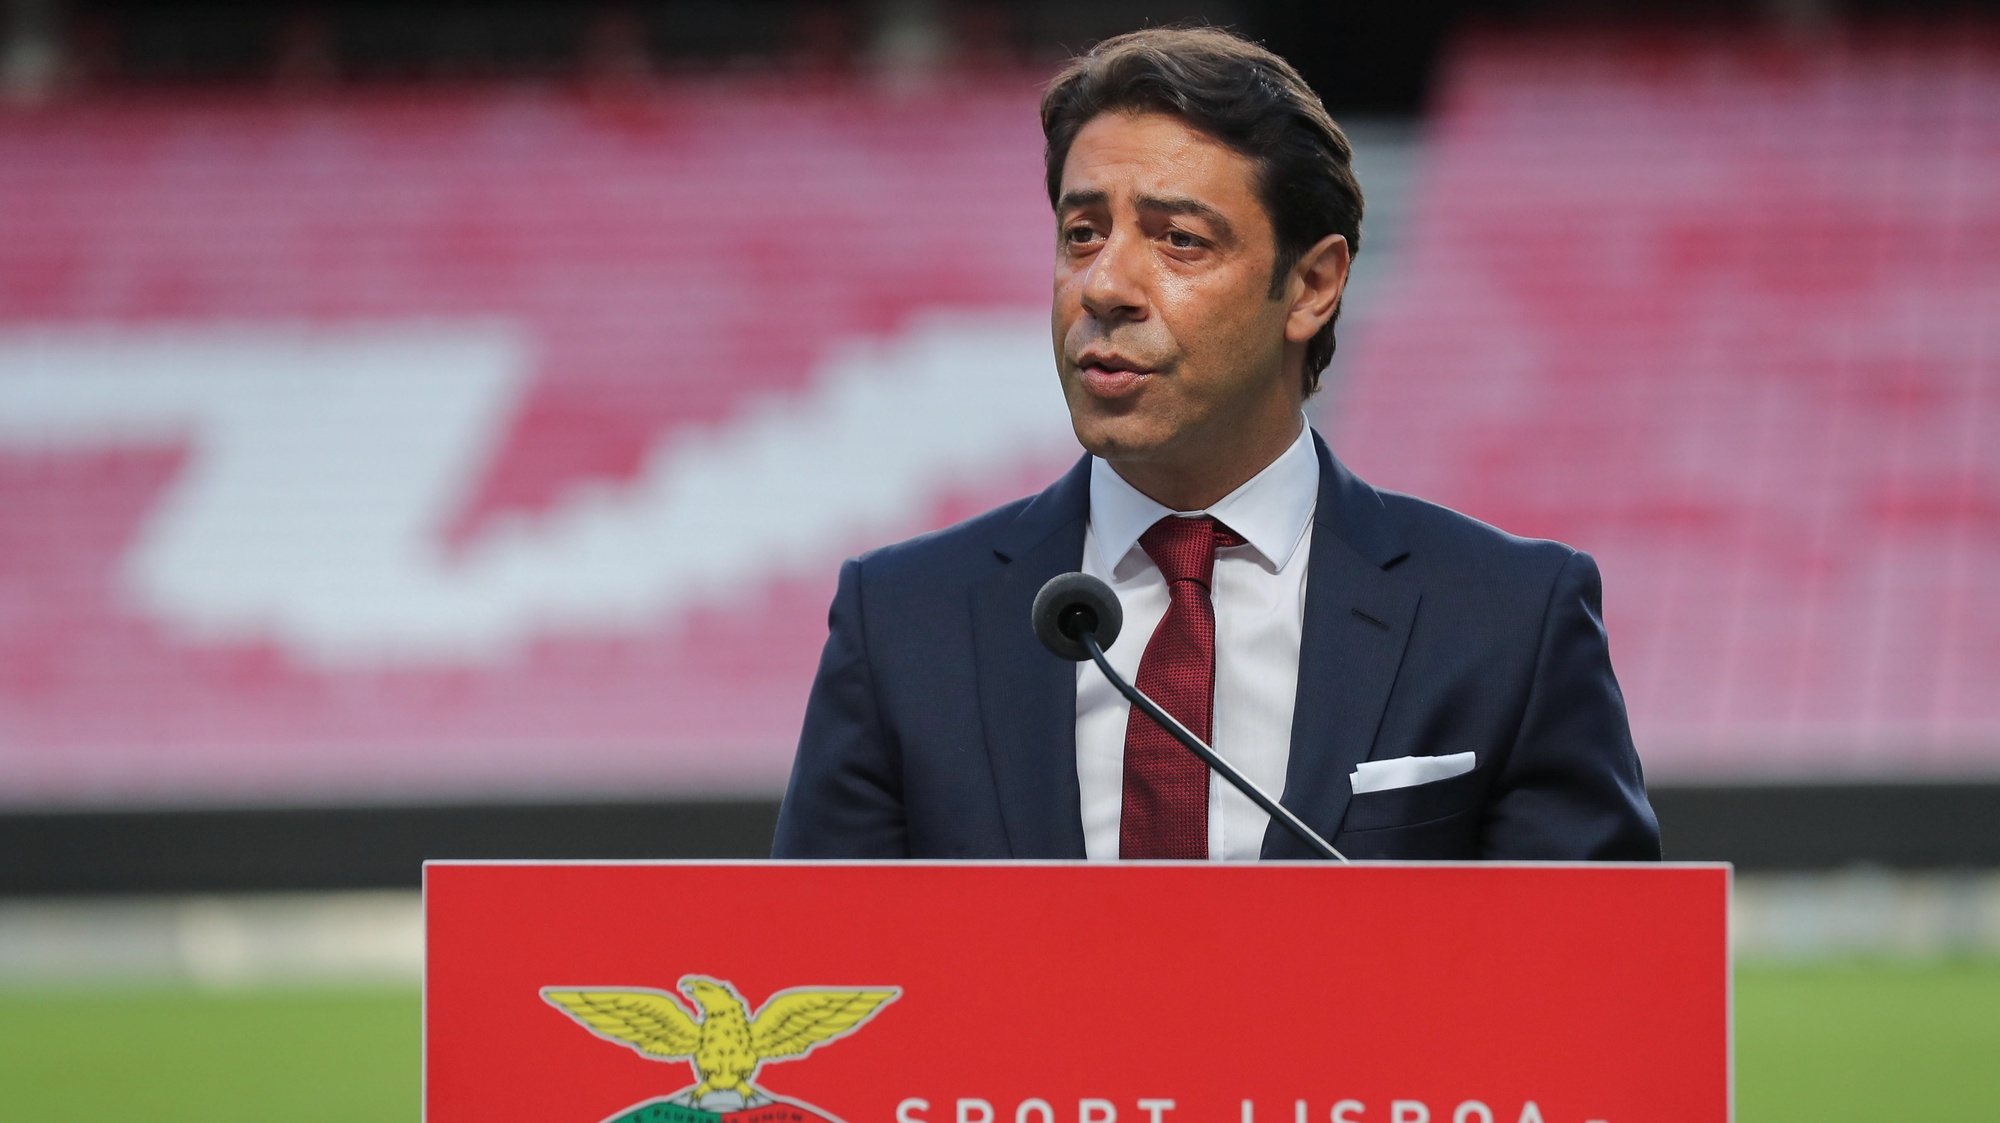 epa09334698 Former Portuguese player Rui Costa speaks during a press conference after being appointed new president of Portuguese soccer club Benfica in Lisbon, Portugal. 09 July 2021. Rui Costa replaced Luis Filipe Vieira, who suspended his duties after he was detained as part of an investigation into alleged tax fraud and money laundering.  EPA/MIGUEL A. LOPES